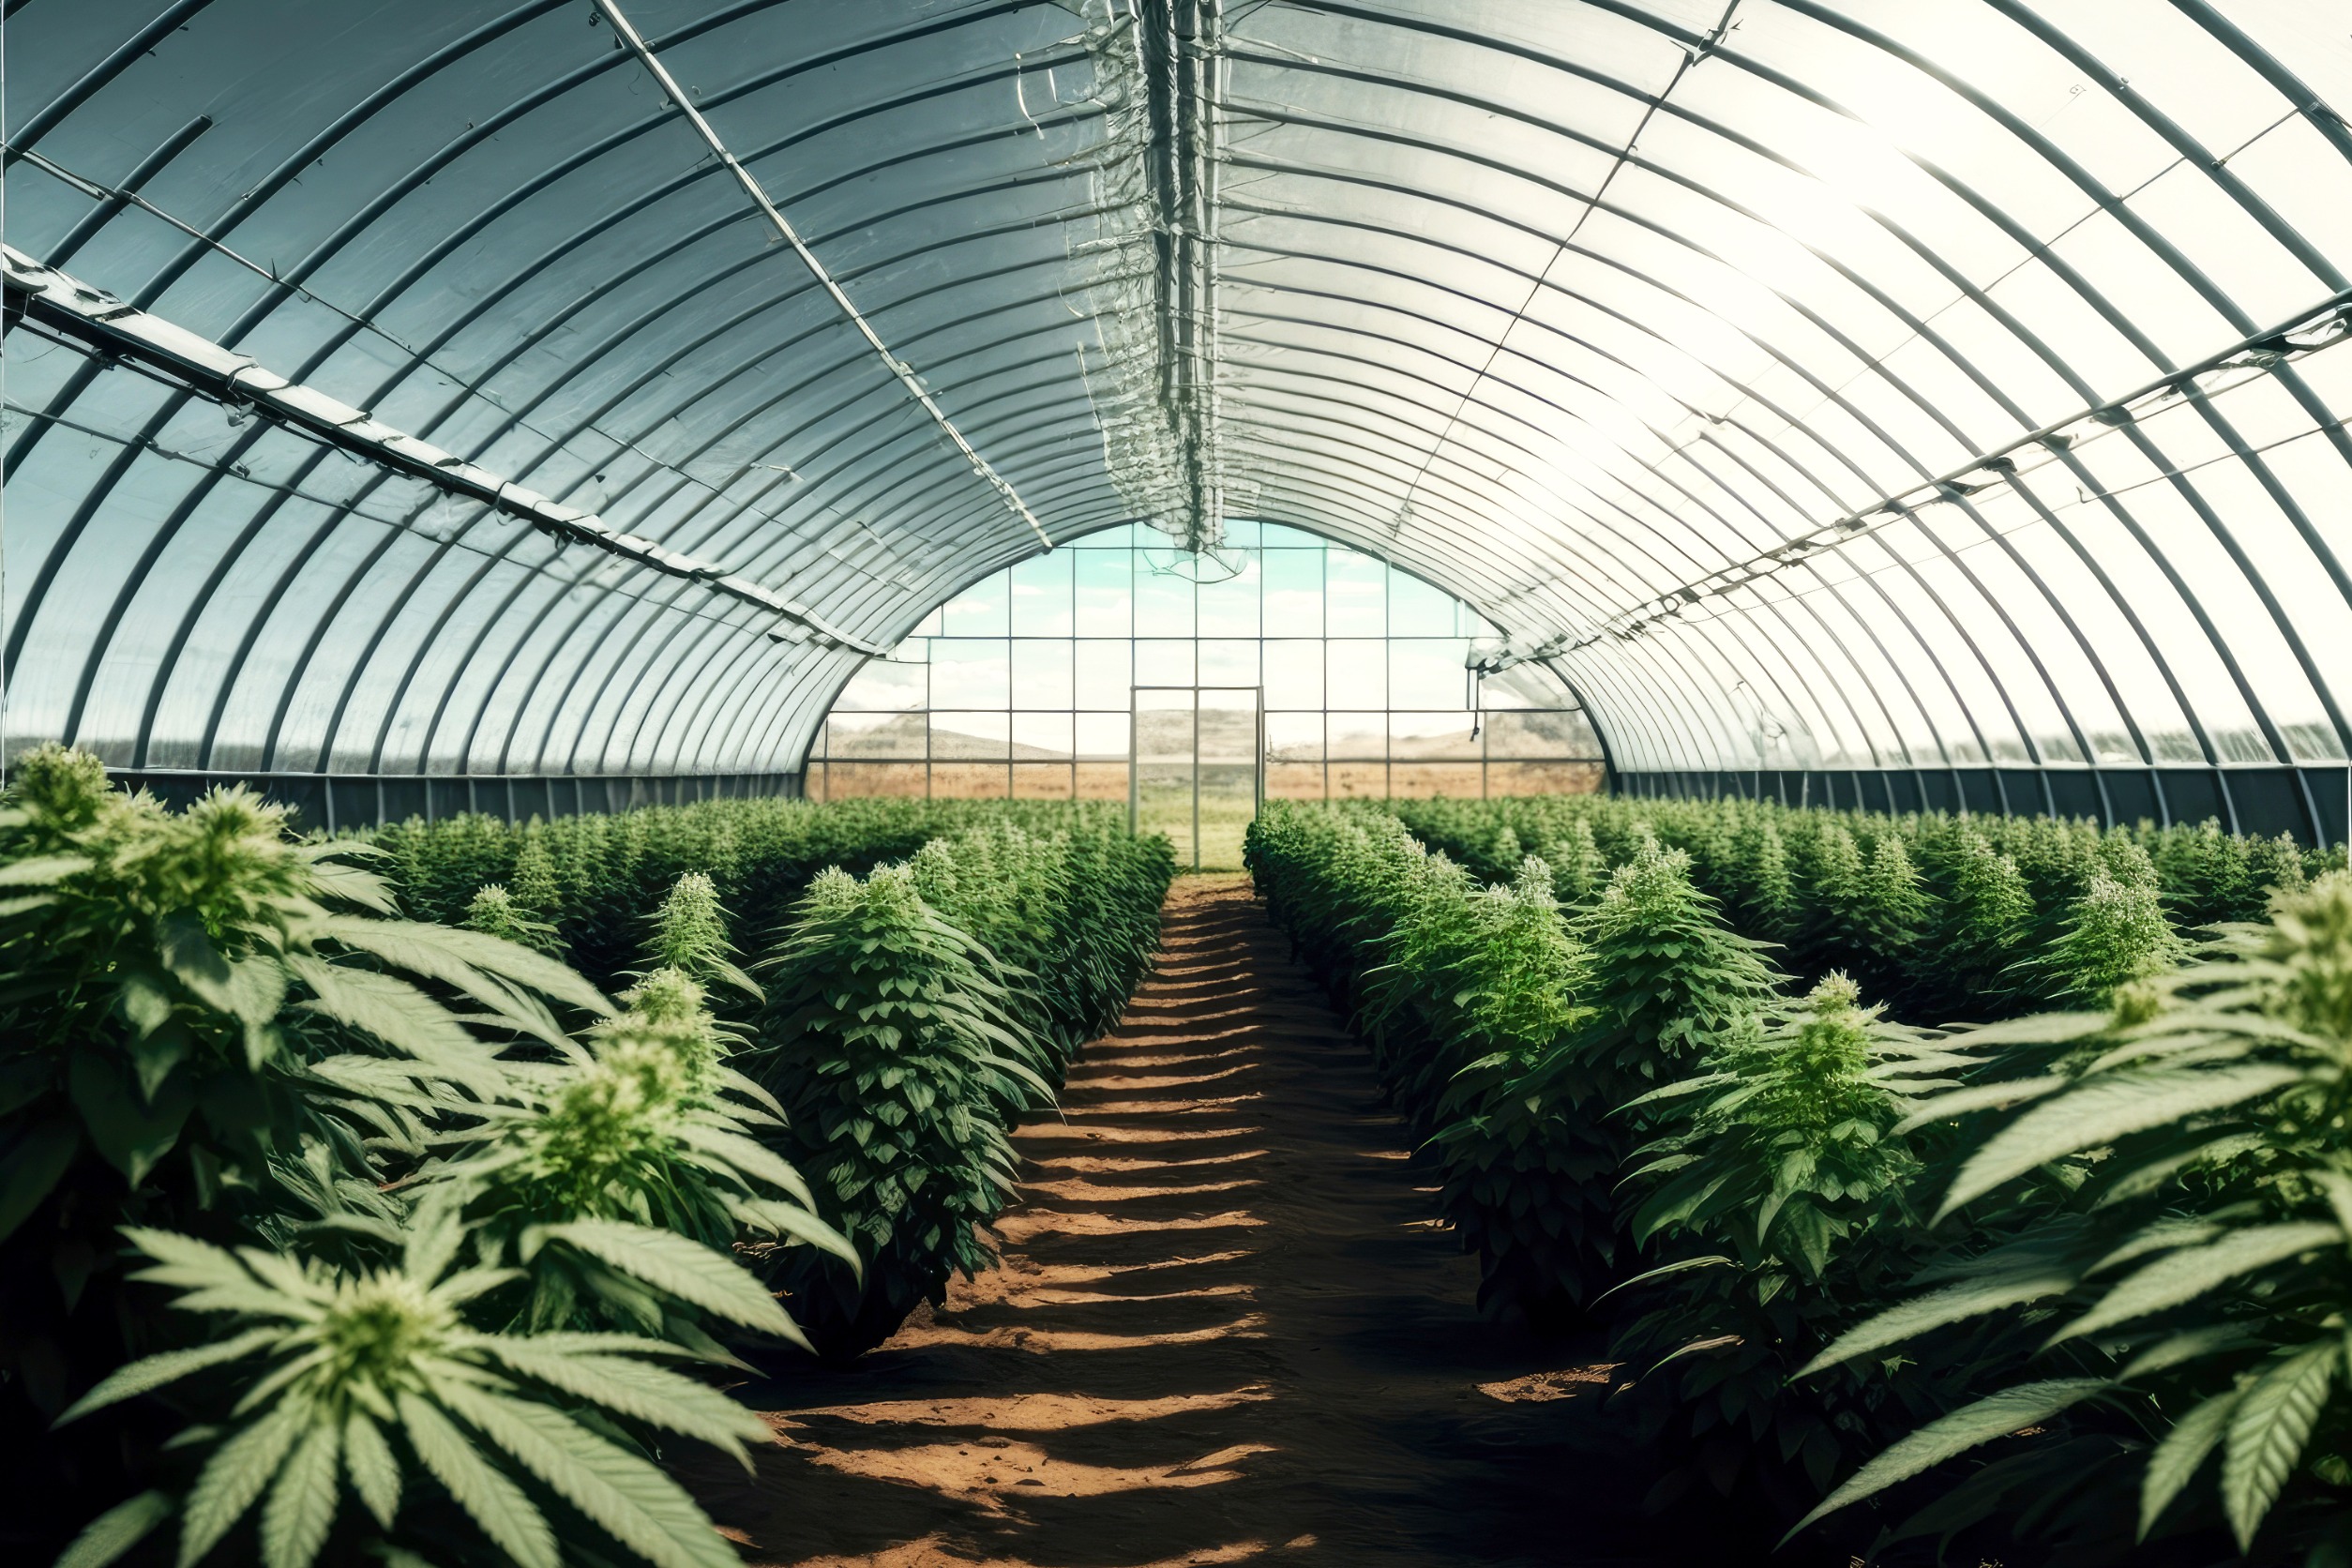 If NH Legalizes Cannabis, the Next Challenge is Attracting Farmers